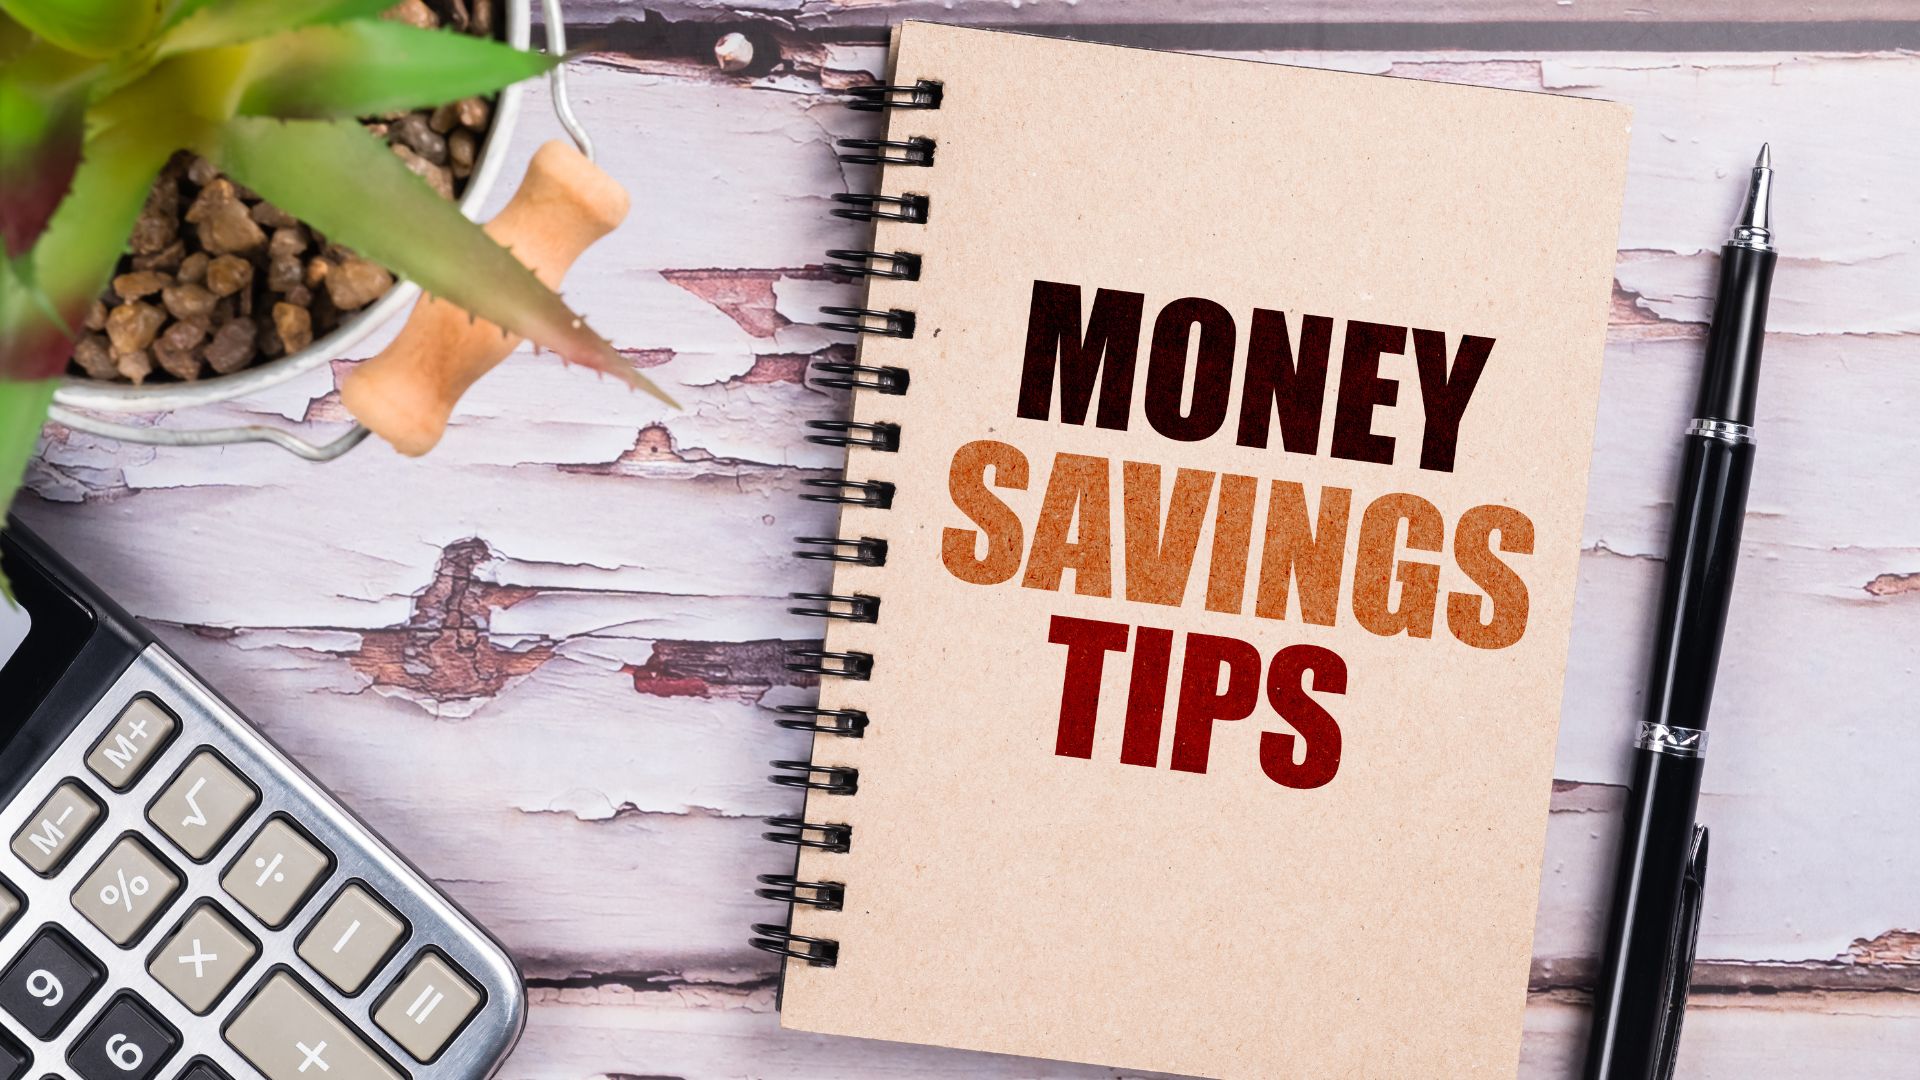 30 Tested Ways To Save Money Every Month: Useful Guidance